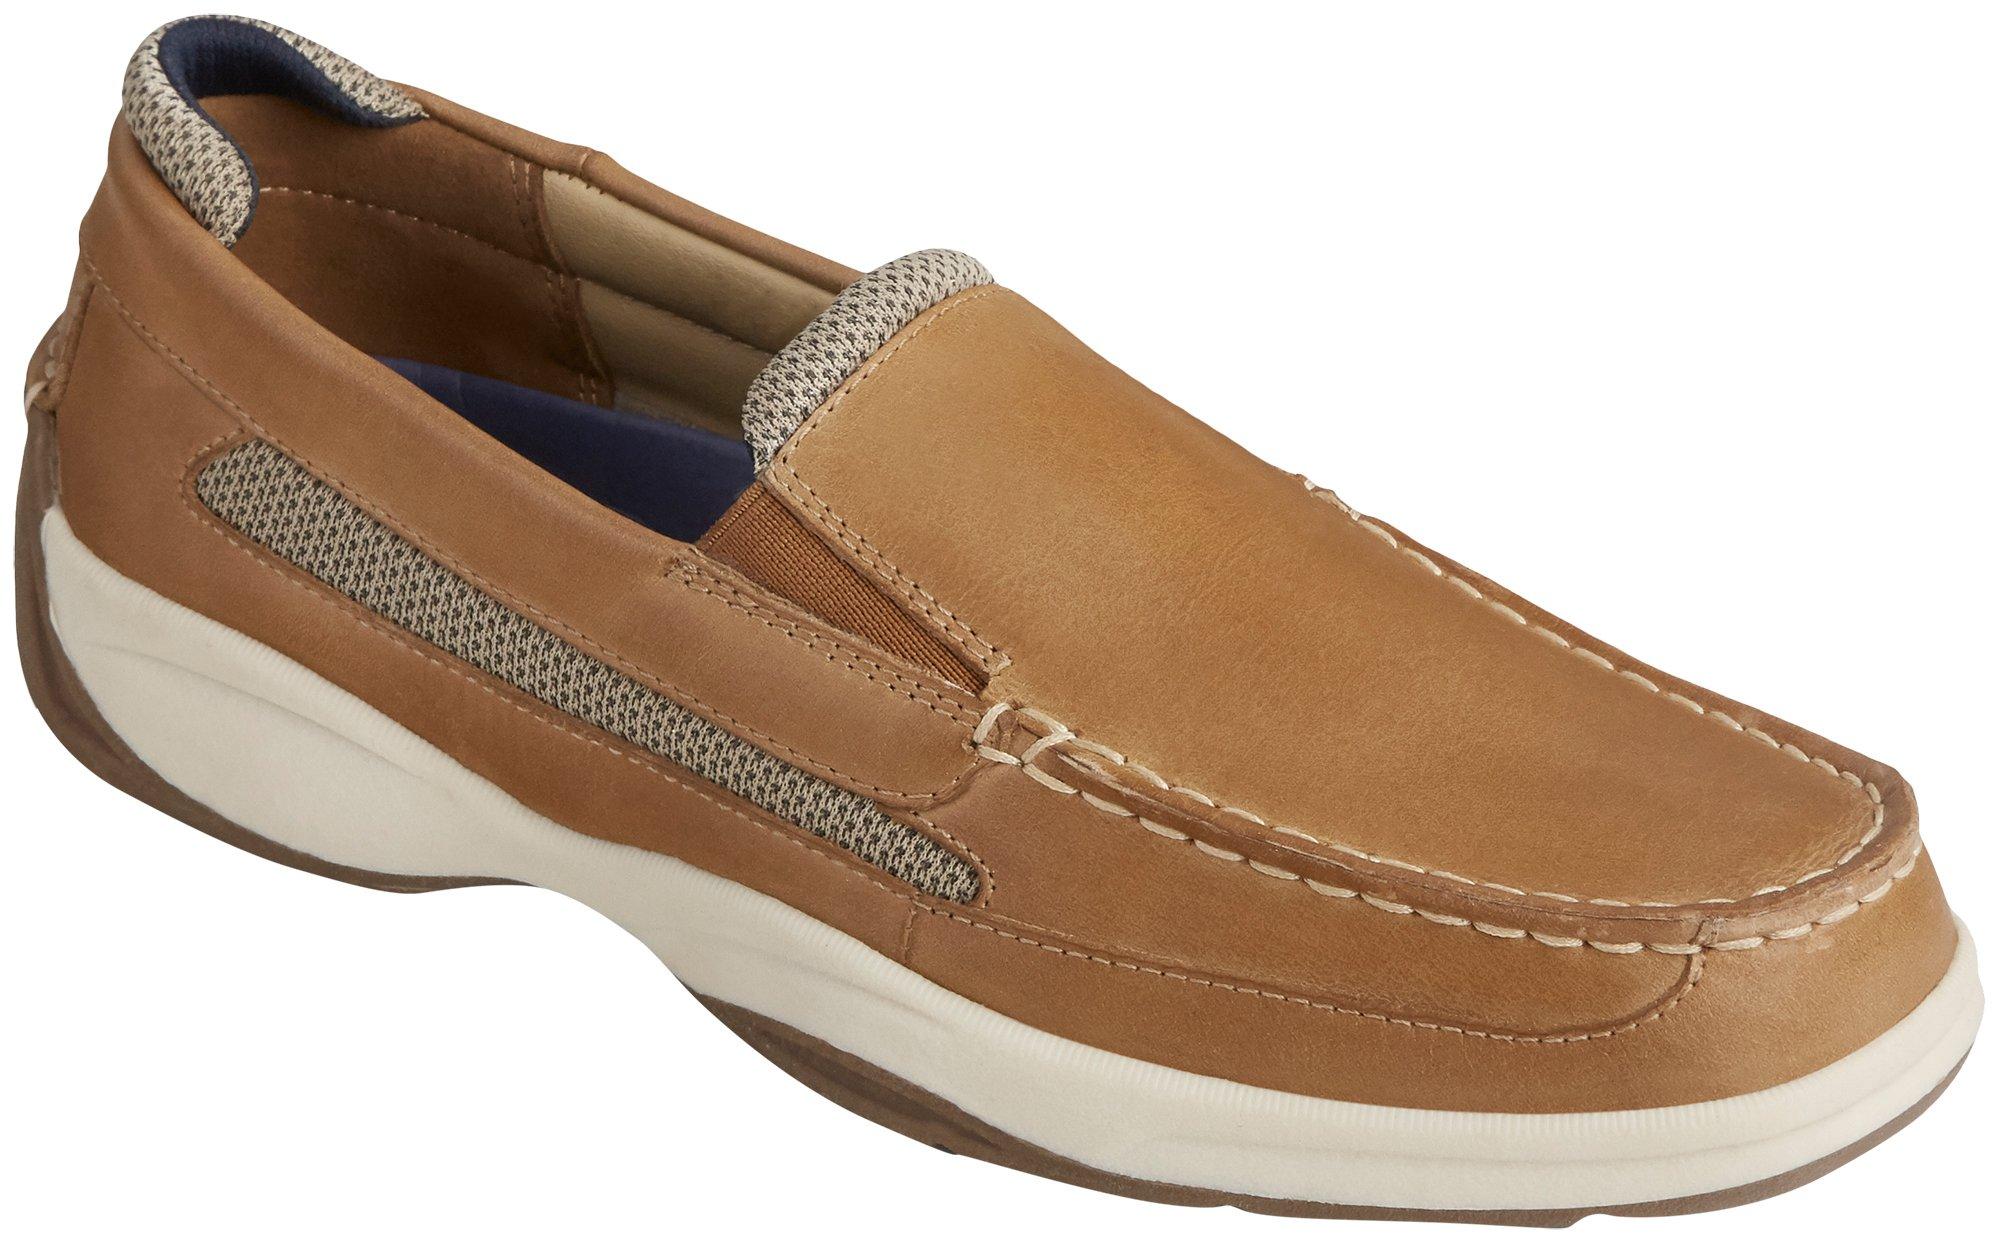 Sperry Mens Intrepid Slip On Boat Shoes